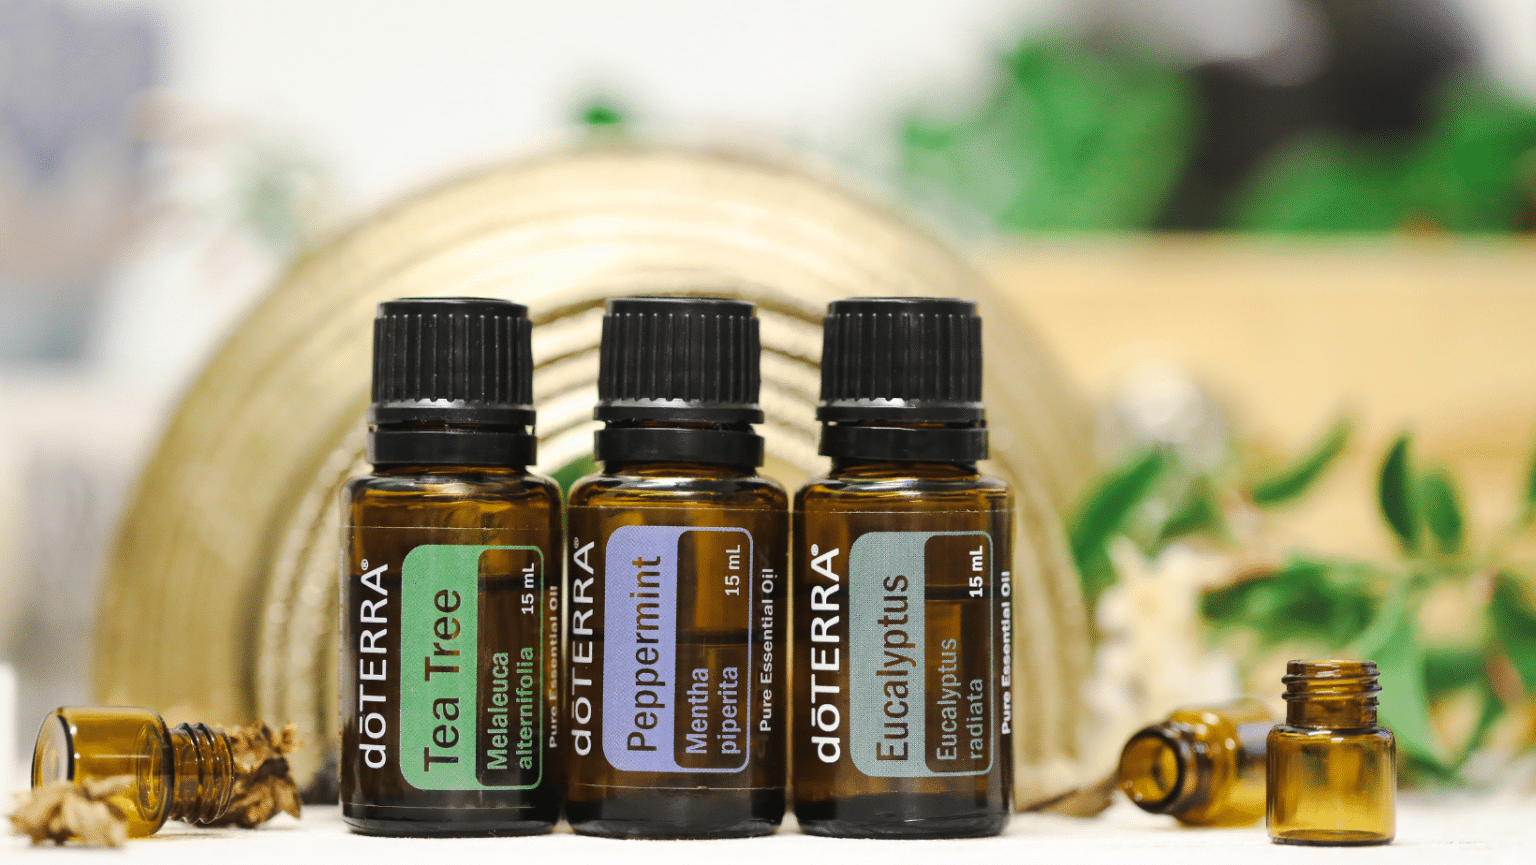 Essential Oils For Wellness and Relieving Discomfort by DoTERRA